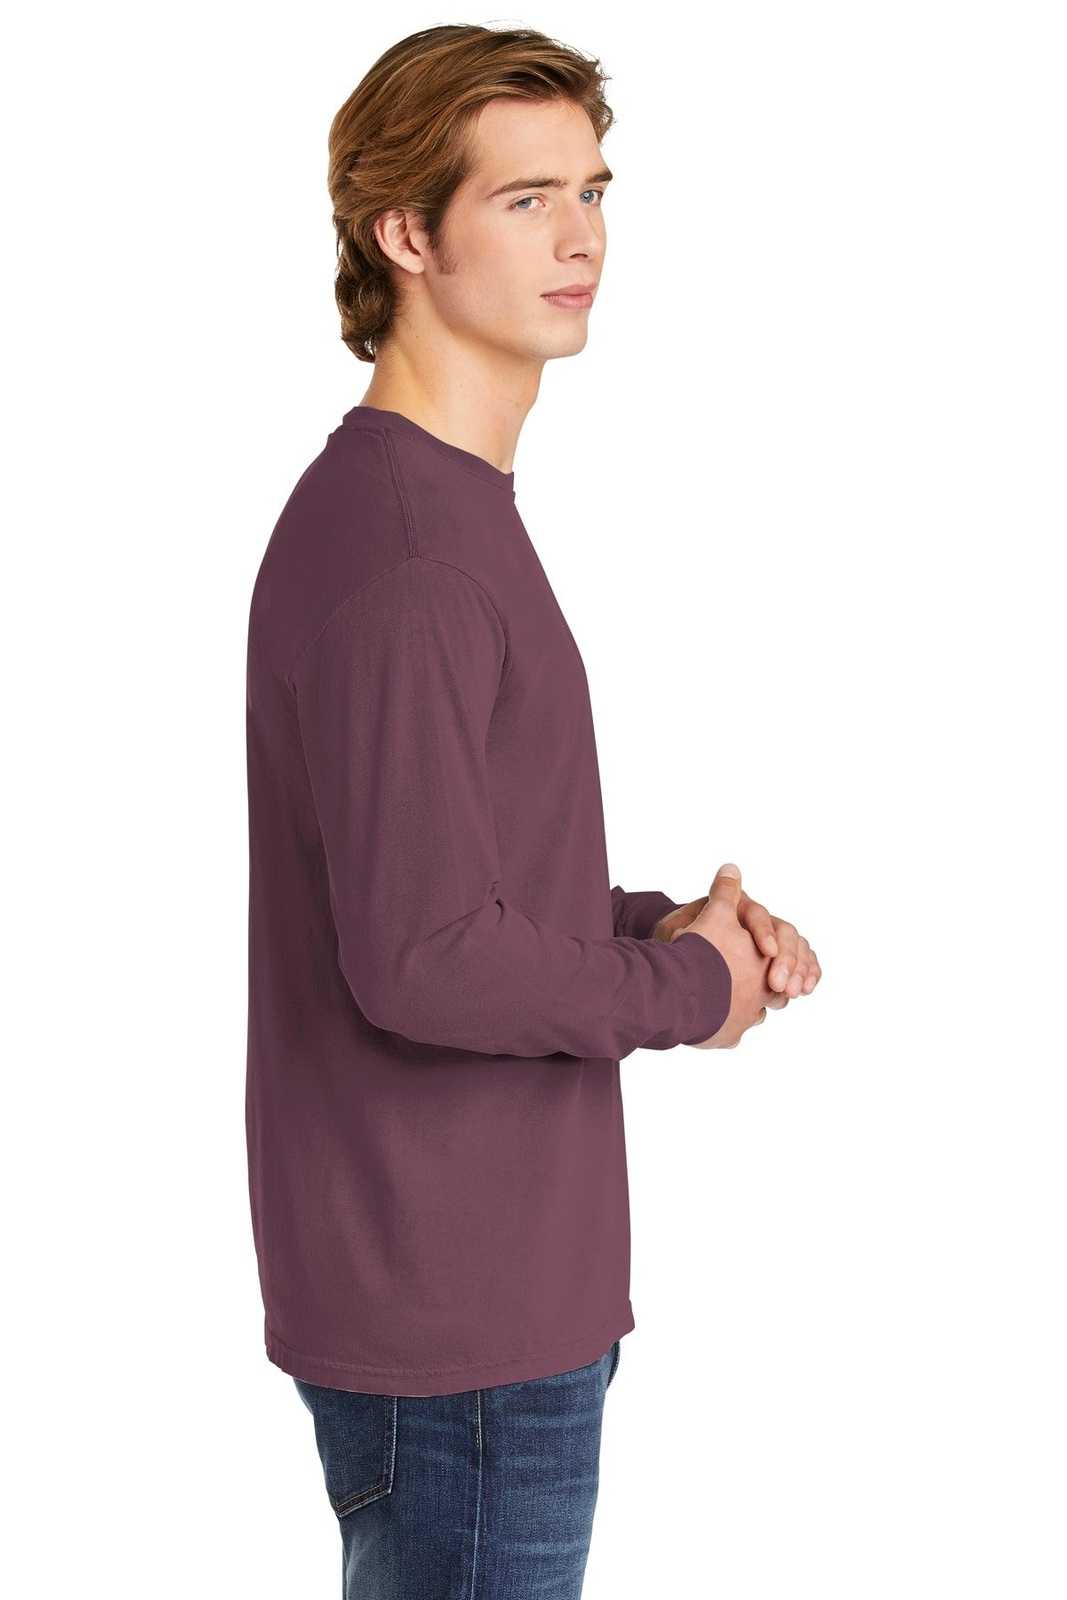 Comfort Colors 6014 Heavyweight Ring Spun Long Sleeve Tee - Berry - HIT a Double